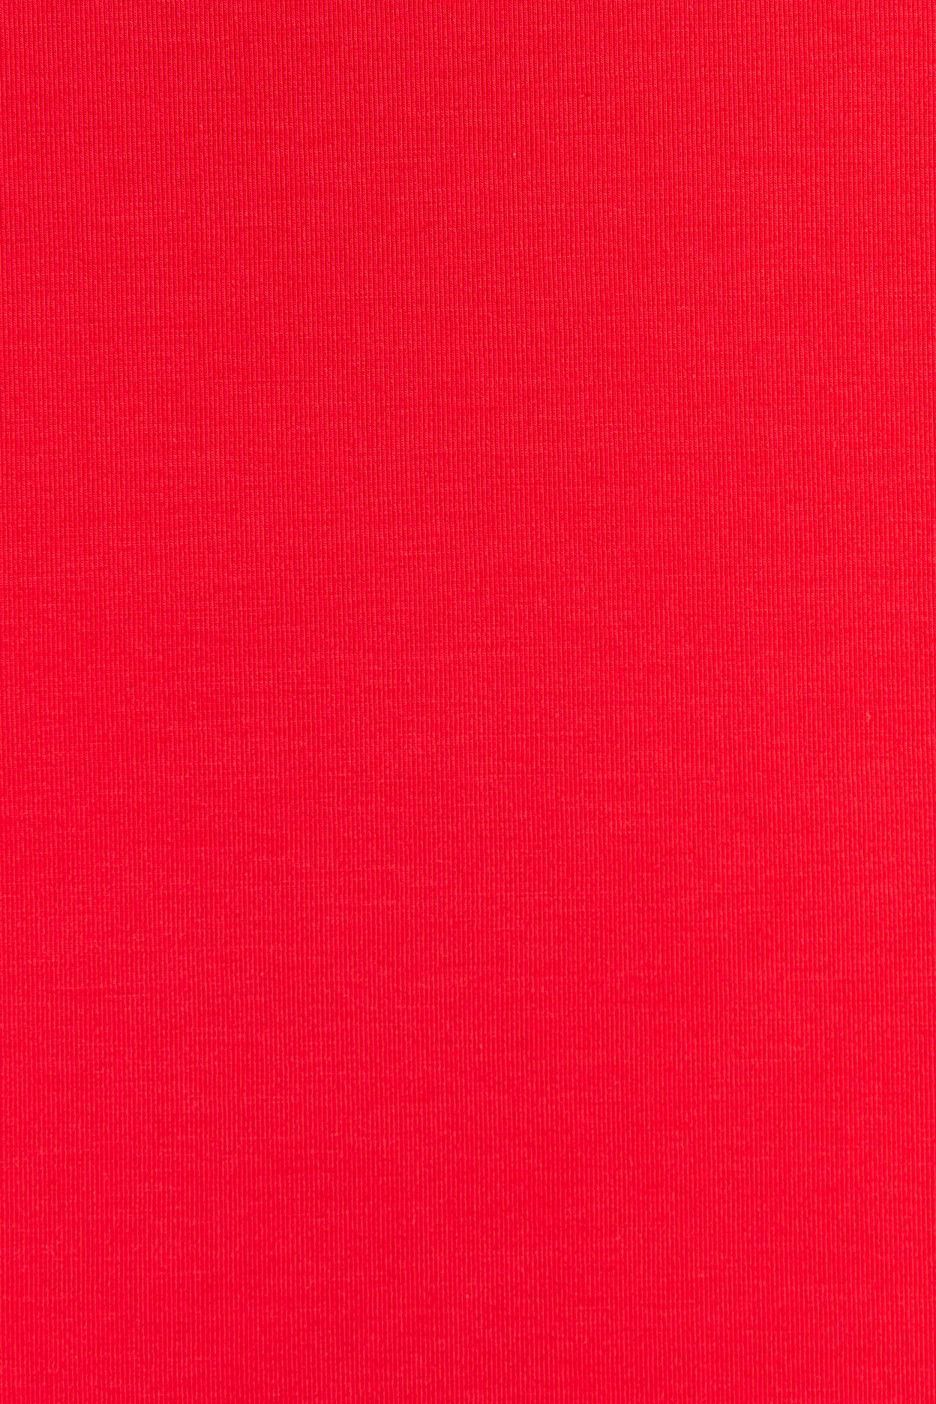 HD red solid wallpapers  Peakpx